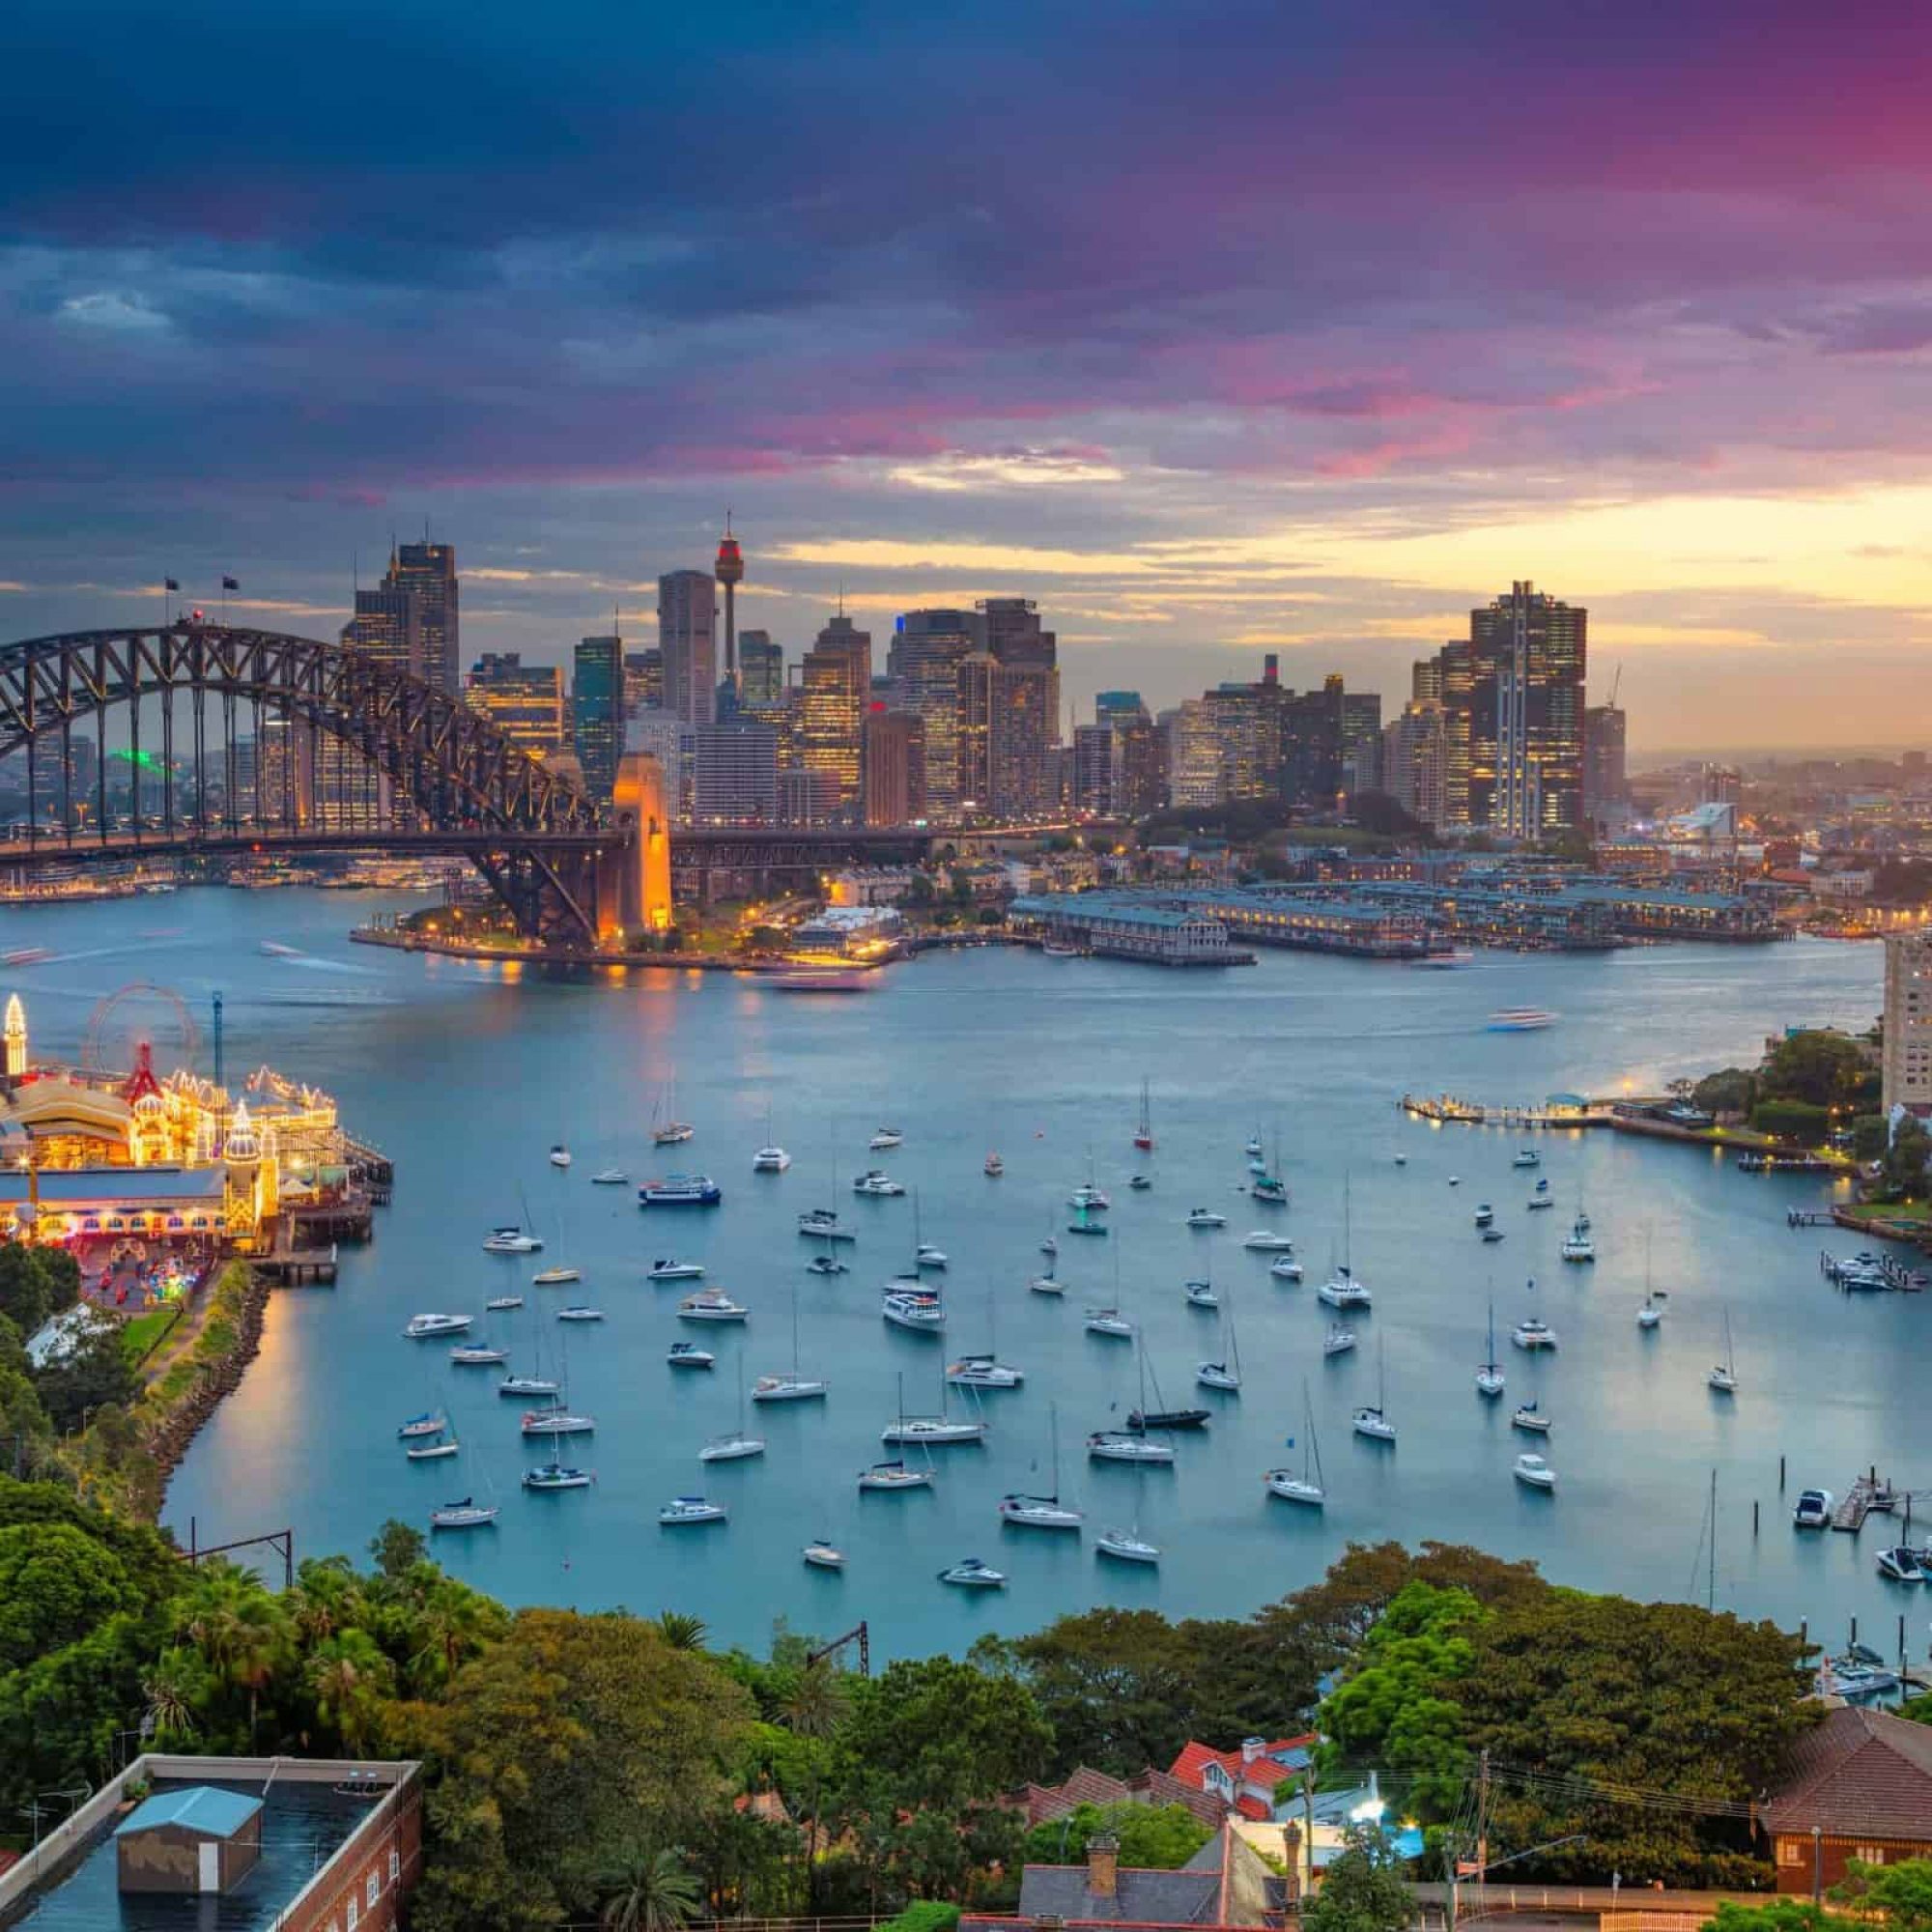 Sydney Harbour, one of the most beautiful harbours in the world